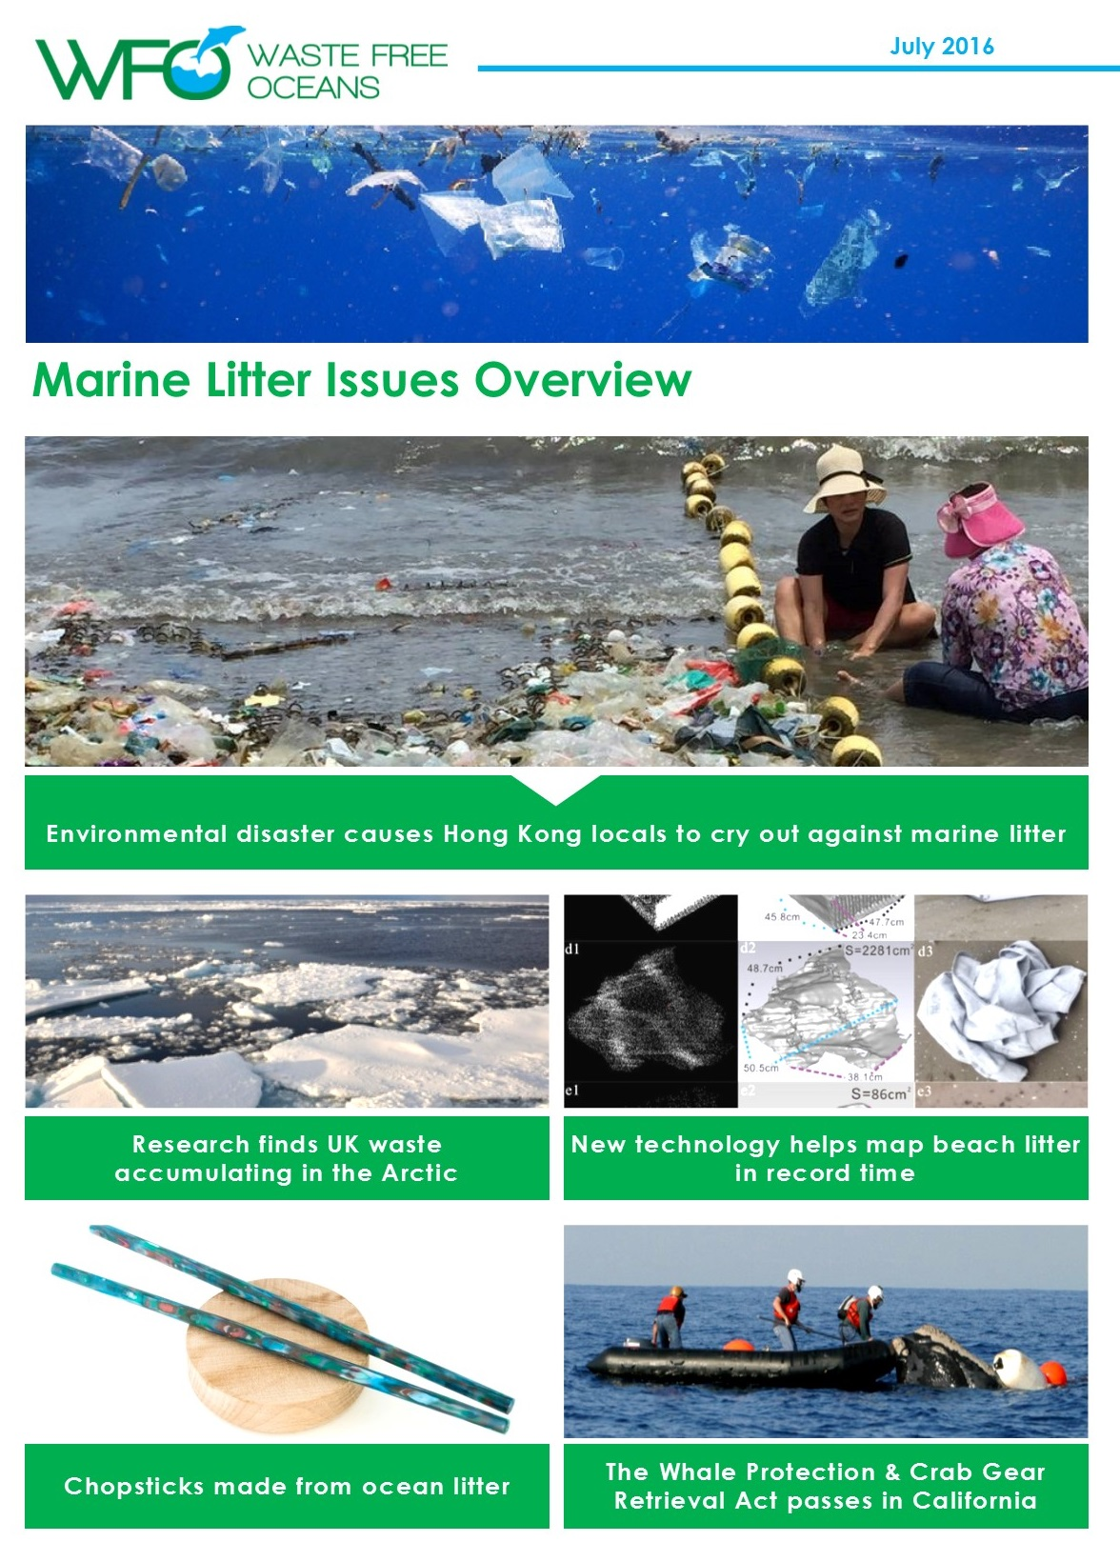 WFO Marine Litter Issues Overview - July 2016